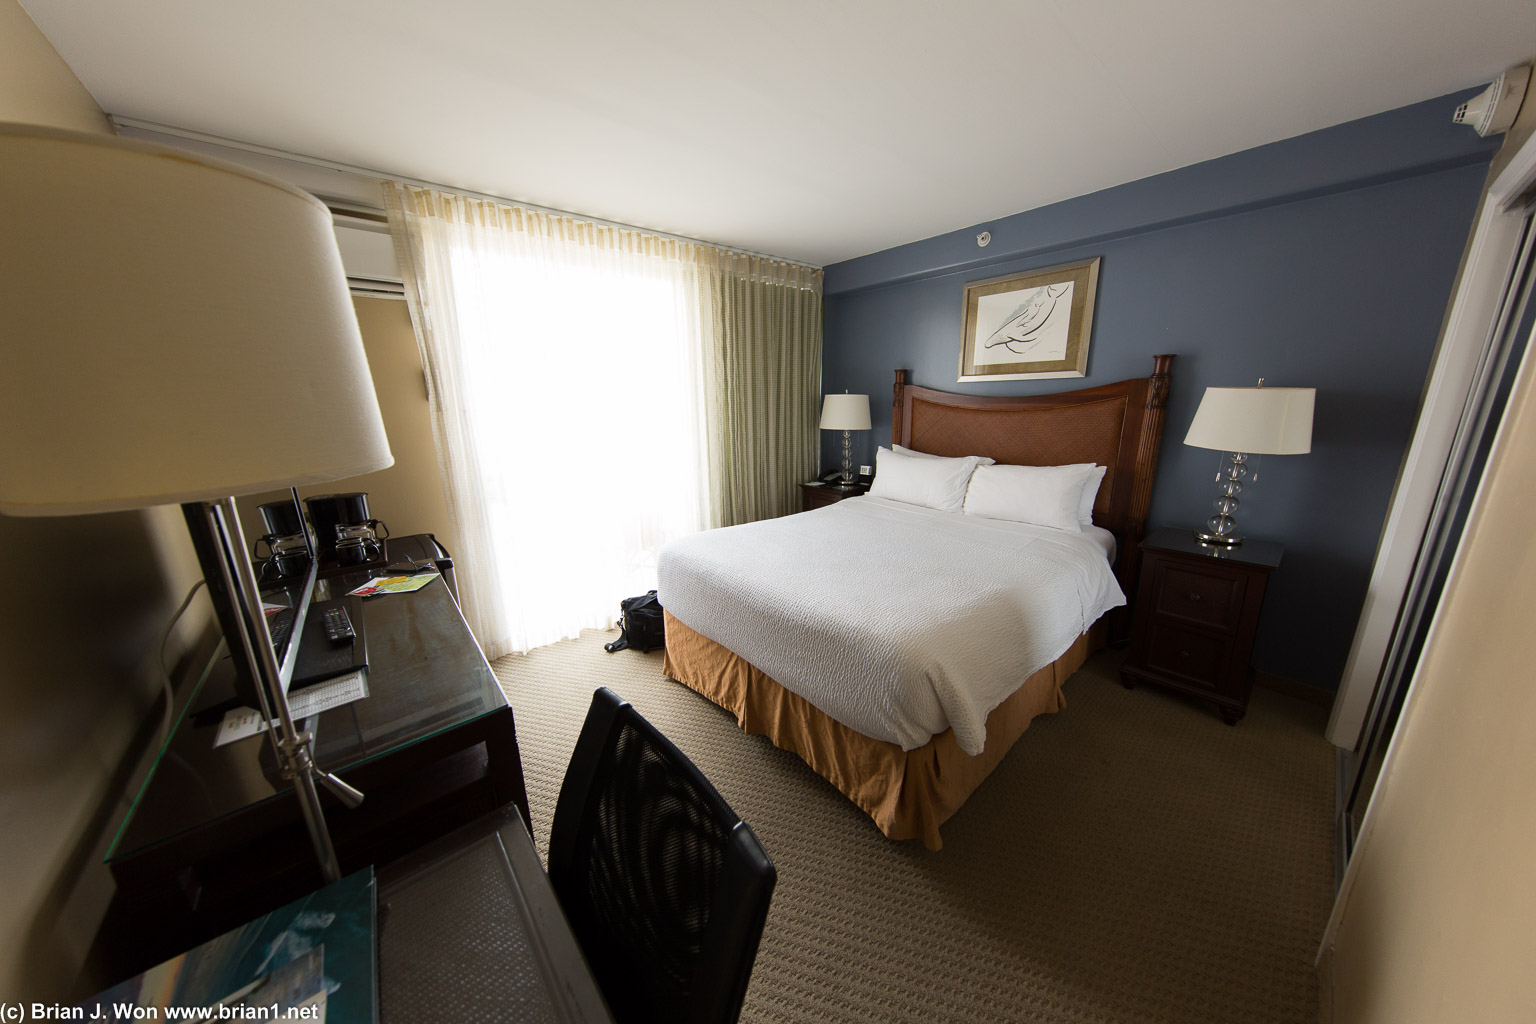 Ultrawide angle lens = how to make a tiny hotel room look spacious.